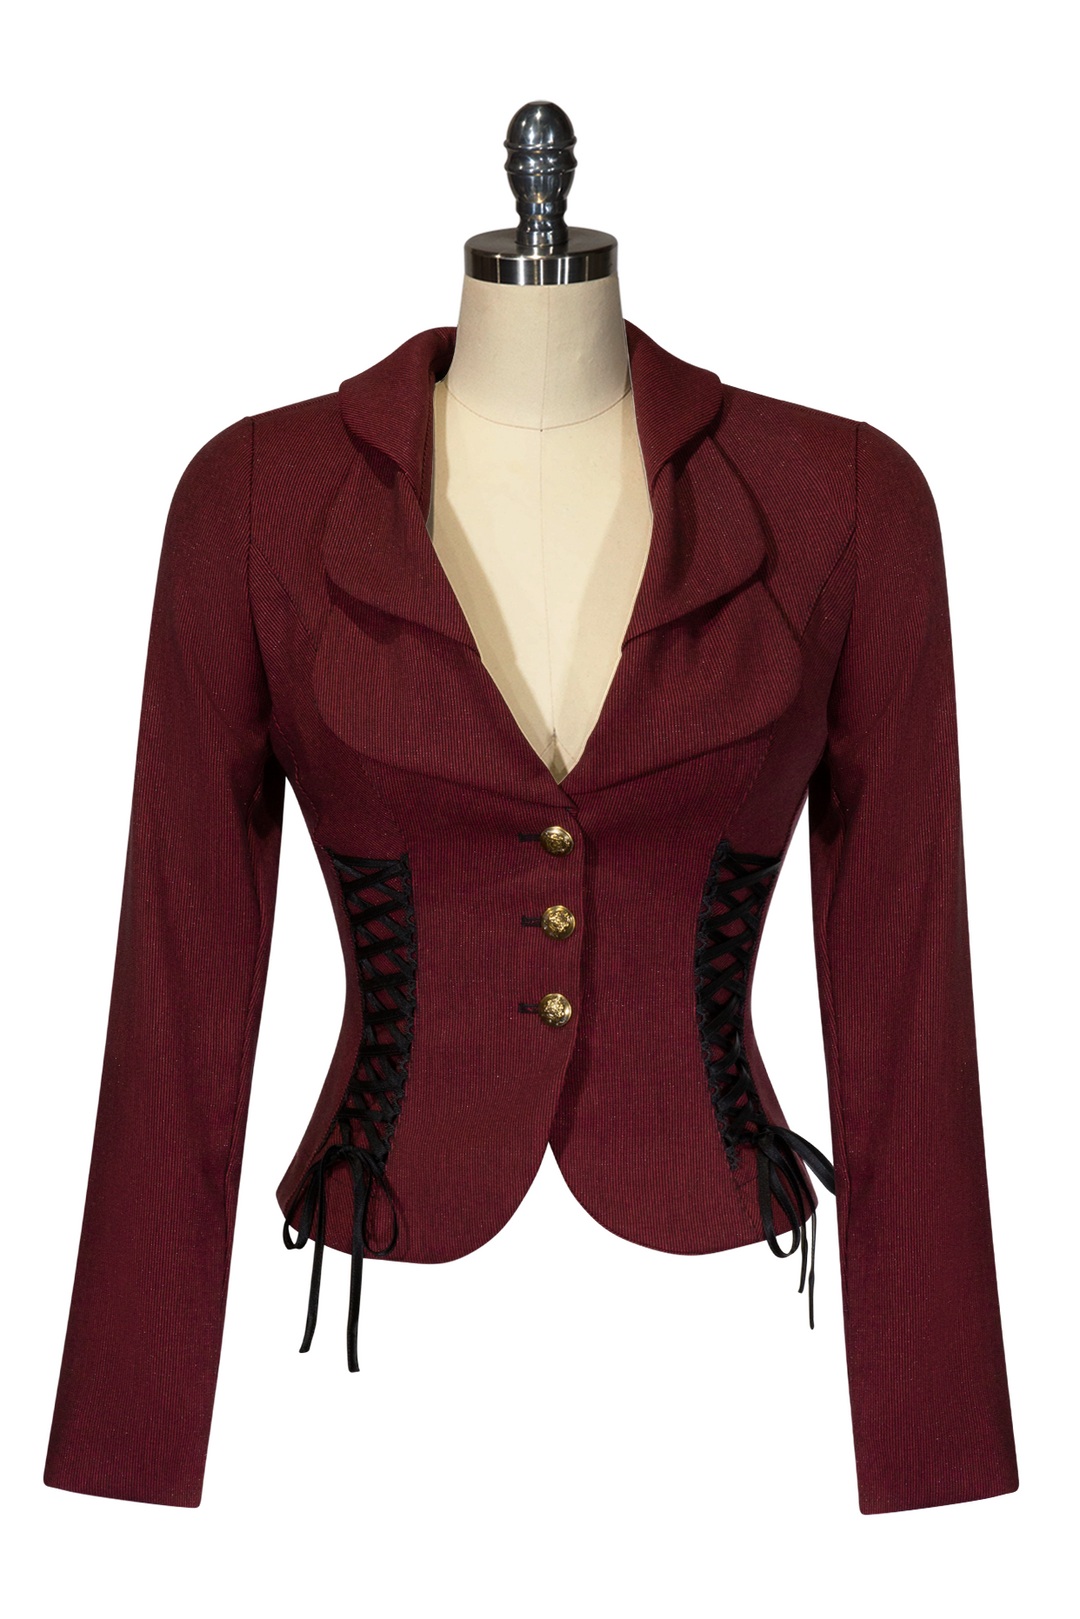 Capone Lace Up Jacket - Kitten D'Amour